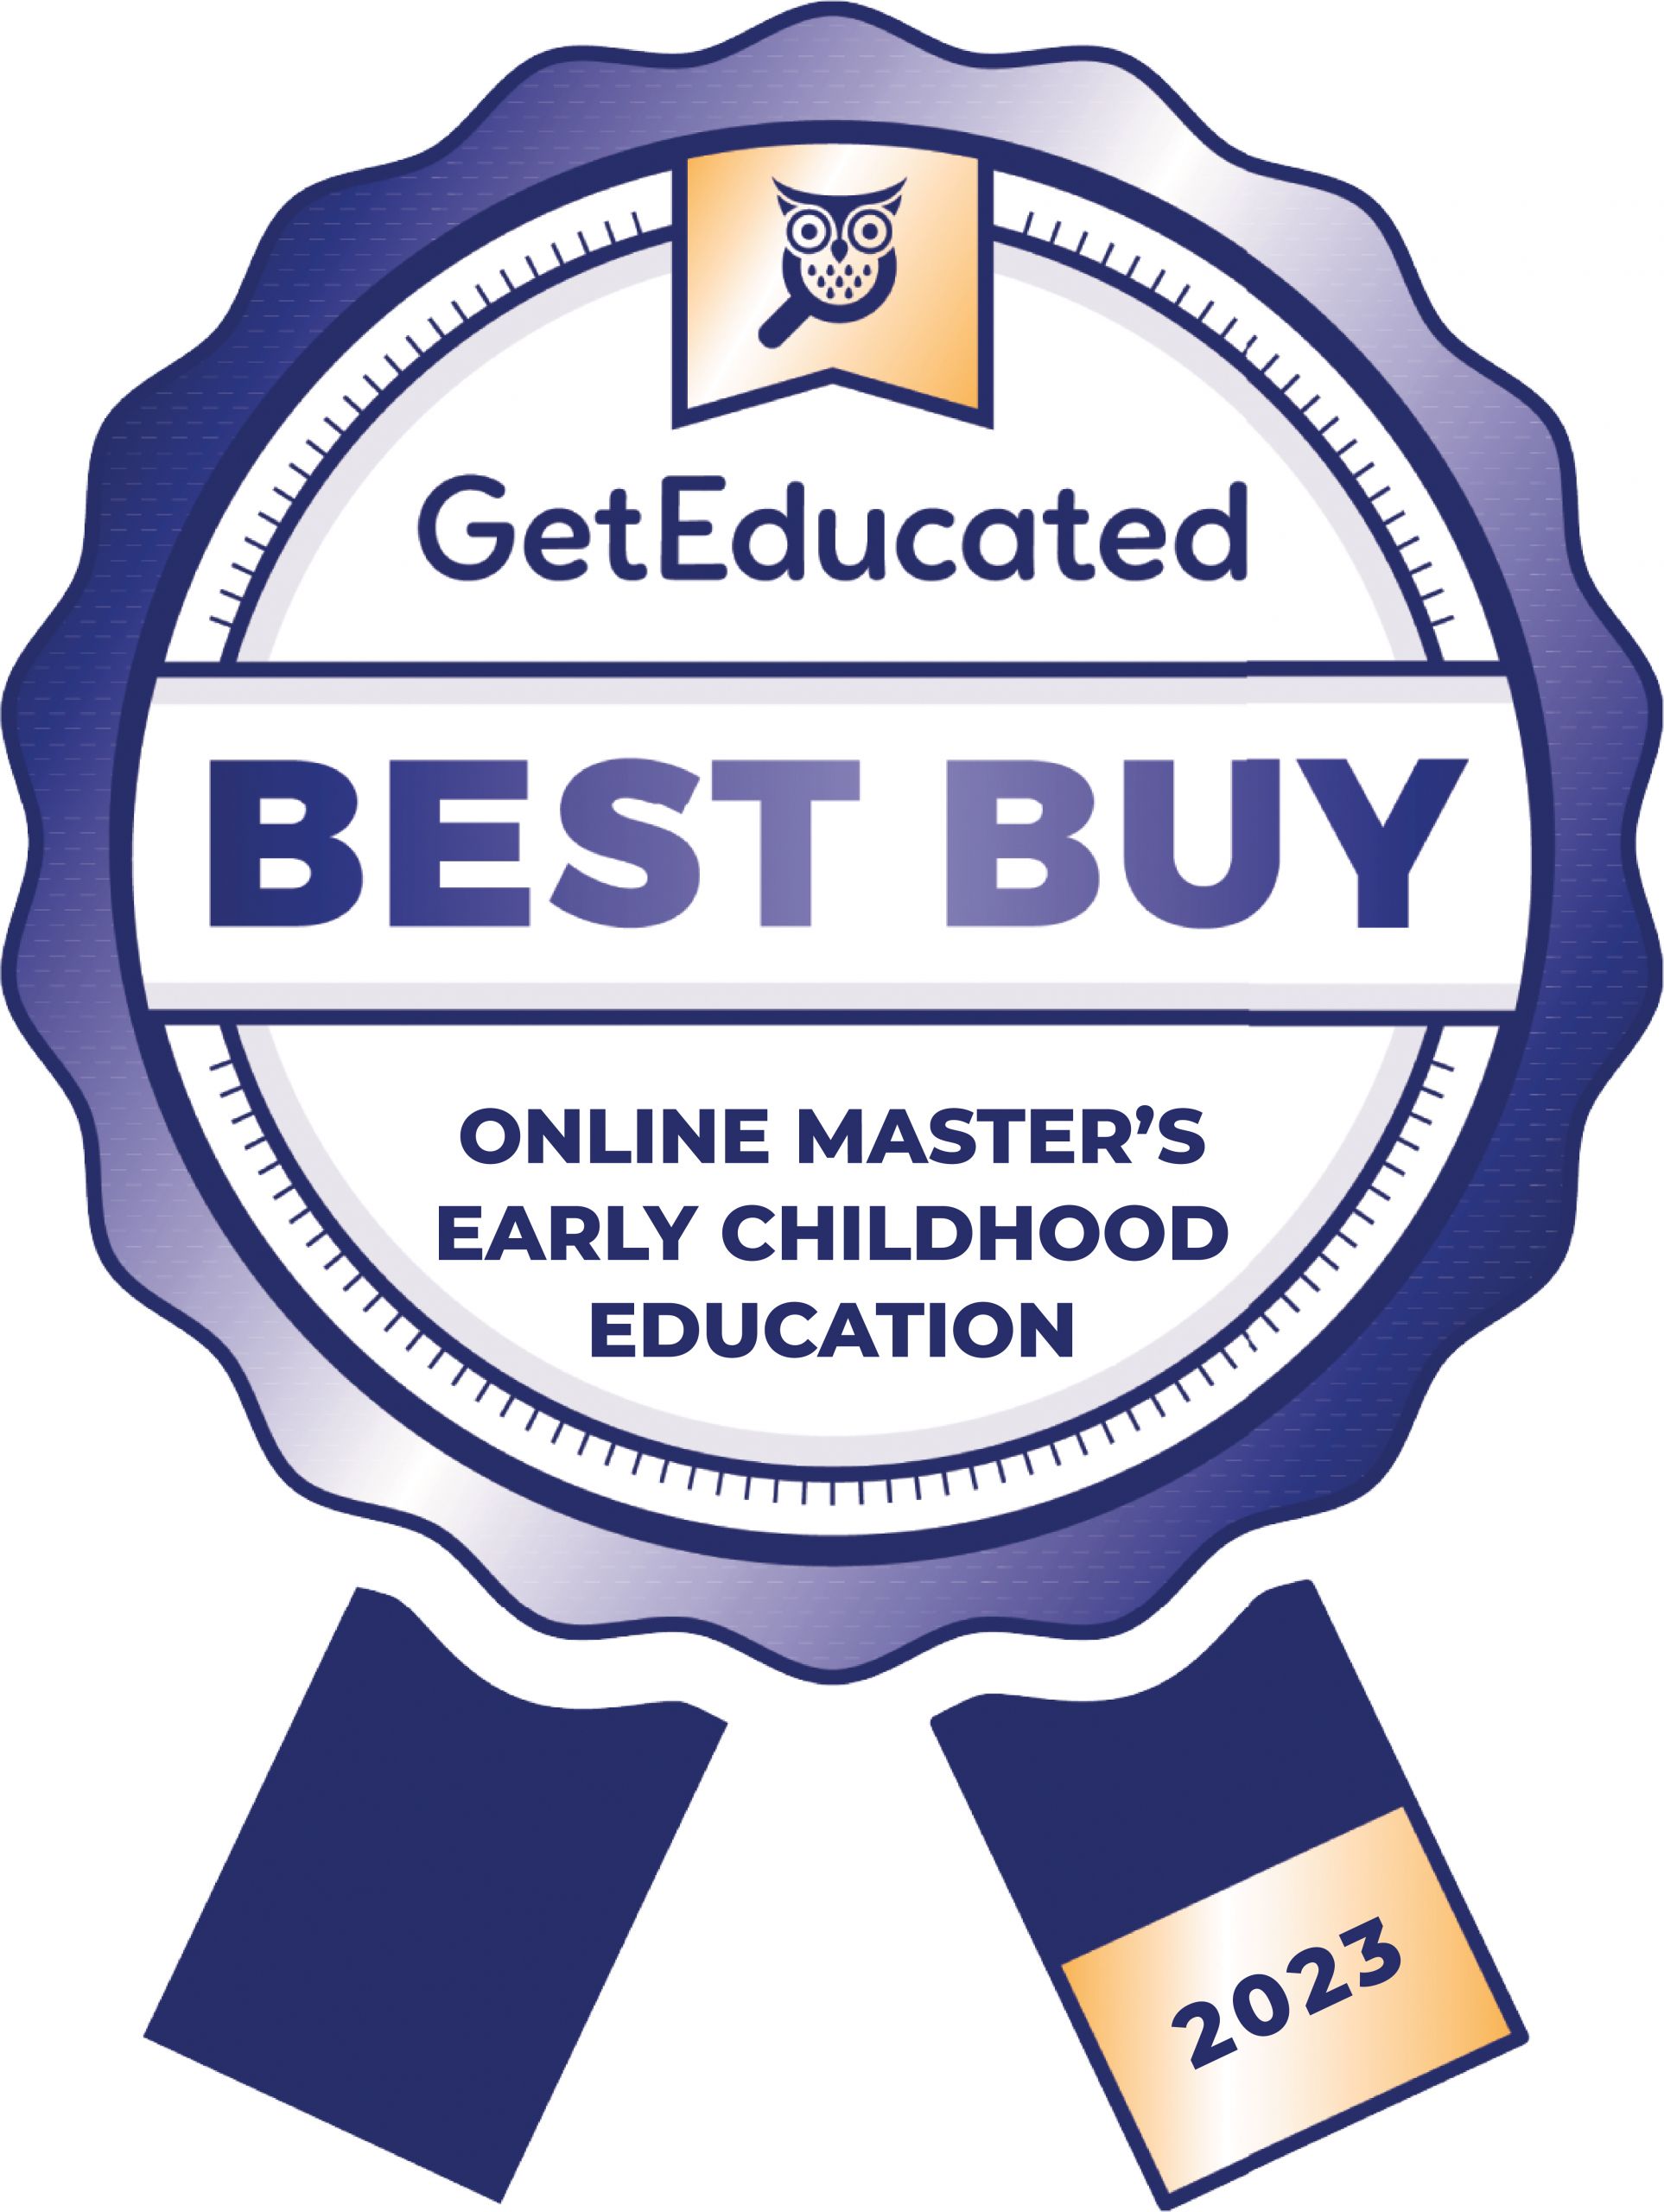 Rankings for the cheapest online master's degree in early childhood education